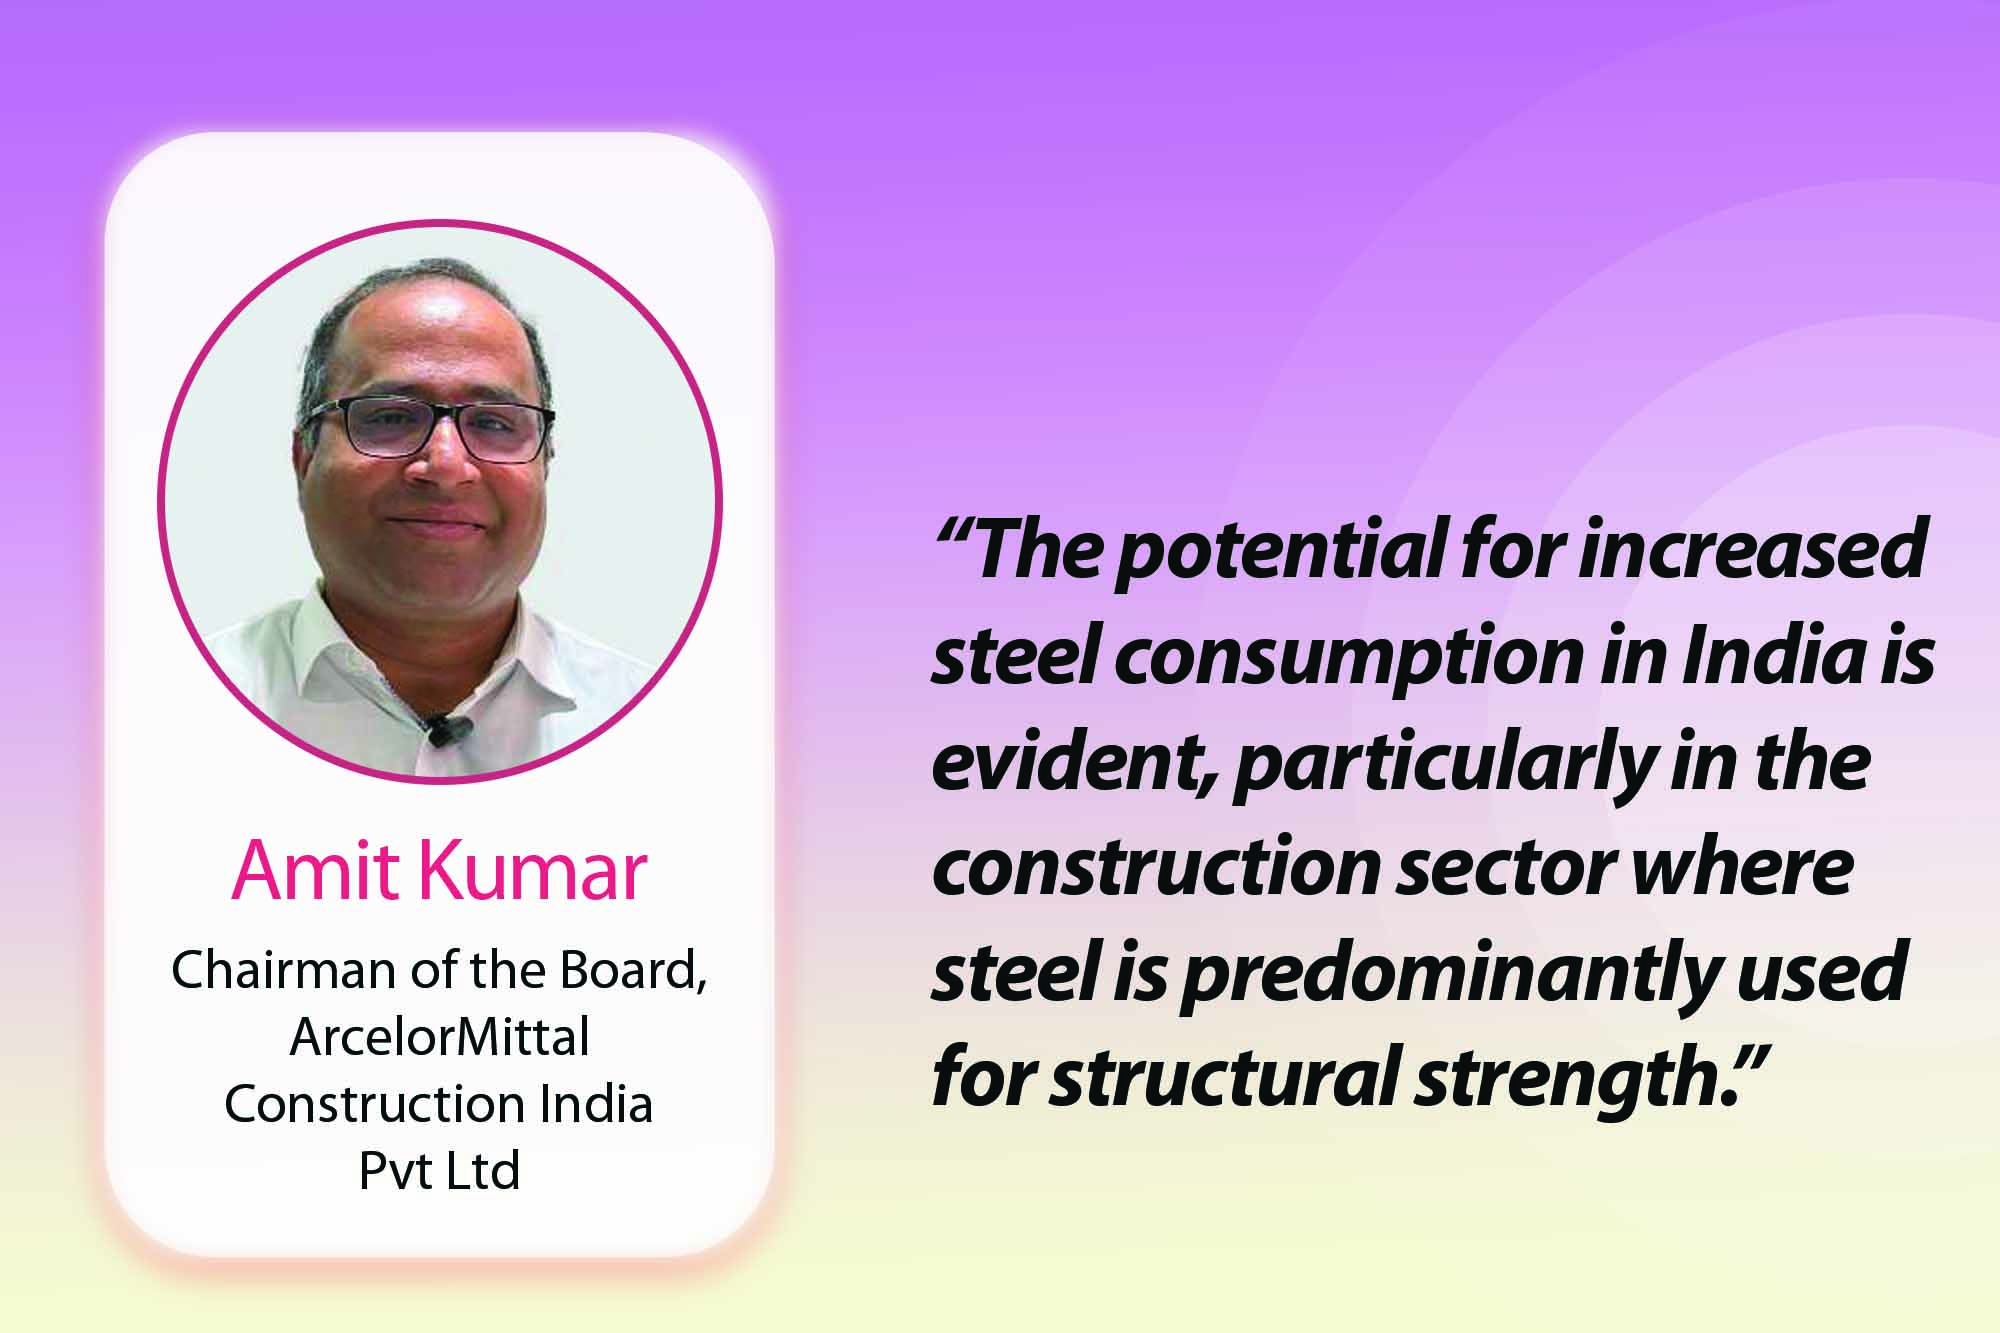 In this interview, Amit Kumar, Chairman of the Board, ArcelorMittal Construction India Pvt Ltd, says that by highlighting their products' long-term benefits, such as energy savings and faster installation, they demonstrate their superior value proposition.